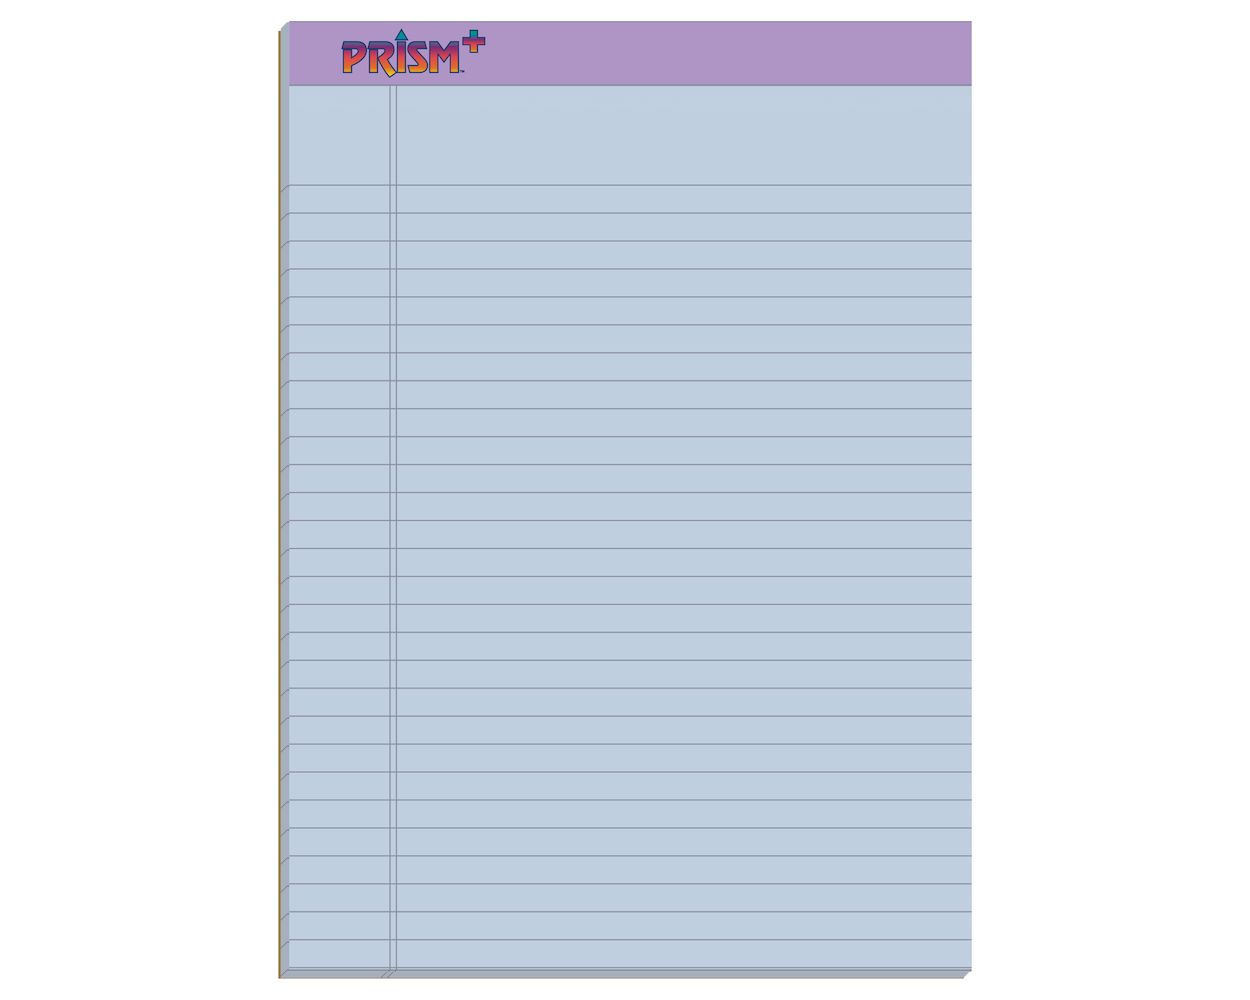 TOPS Prism Plus 100% Recycled Legal Pad 12 Pads per Pack 50 Sheets per Pad Legal/Wide Rule Perforated Green 8-1/2 x 11-3/4 Inches 63190 